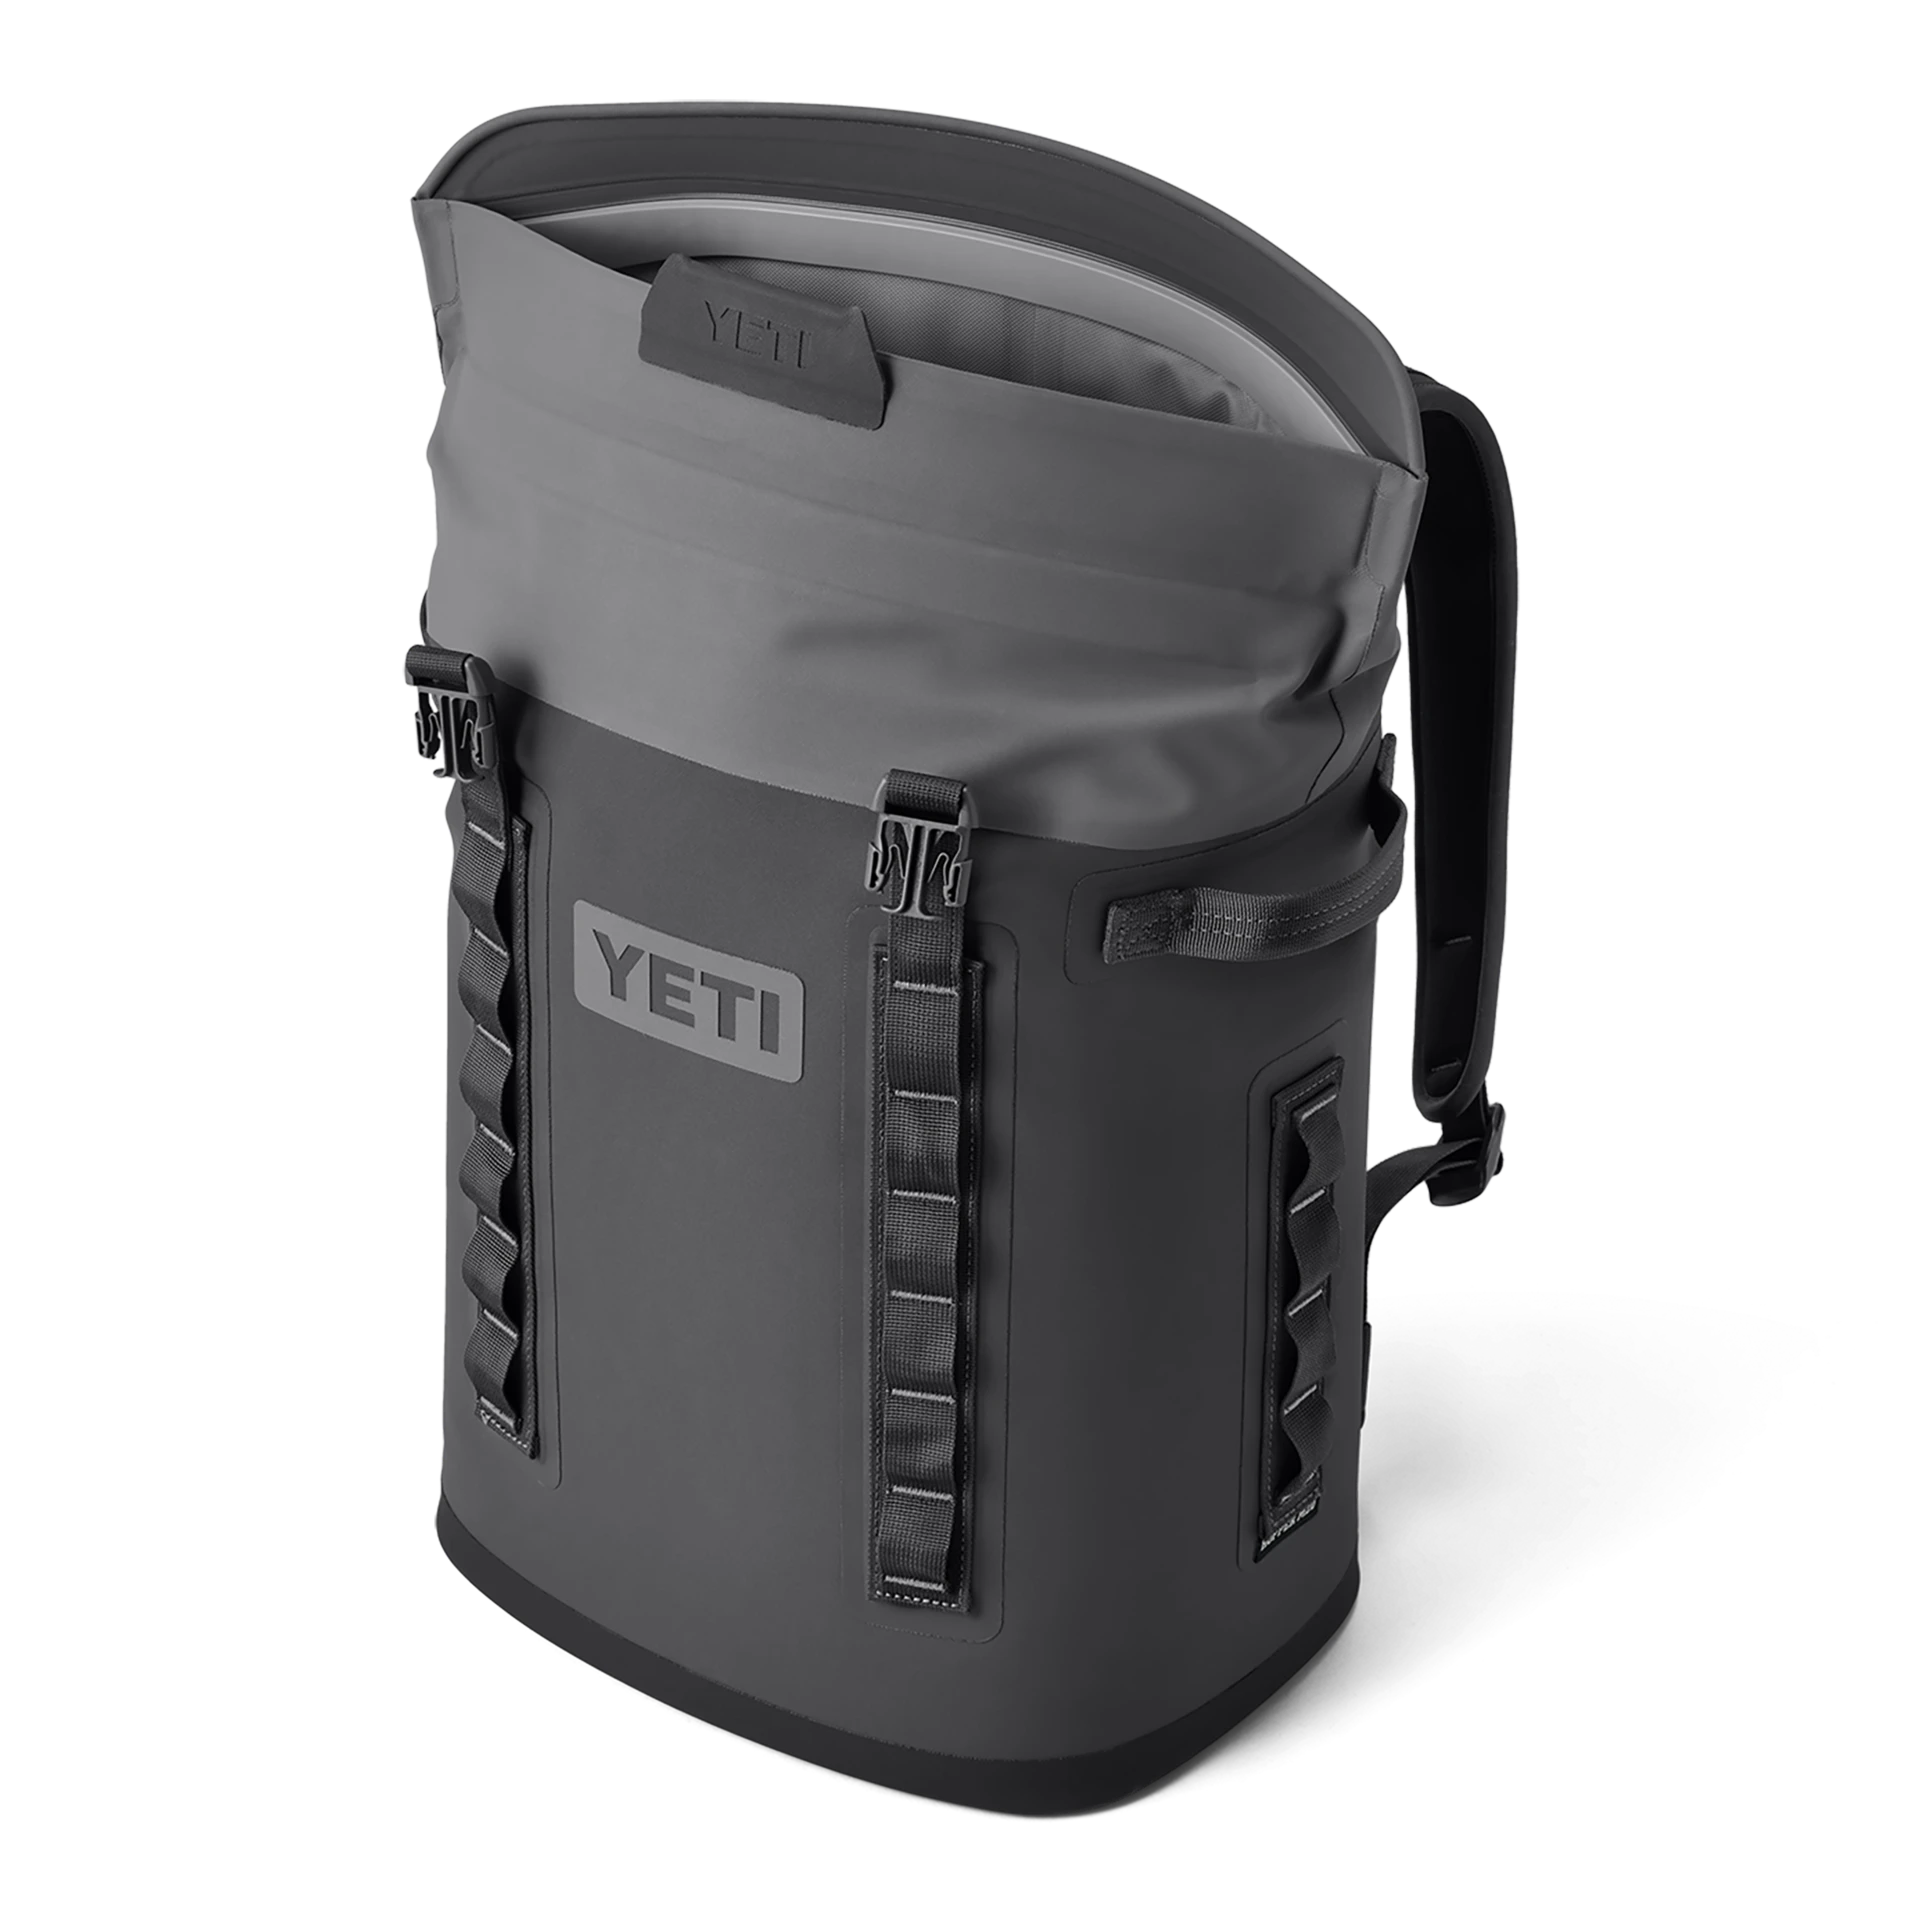 YETI- Hopper M20 Backpack Cooler in Charcoal